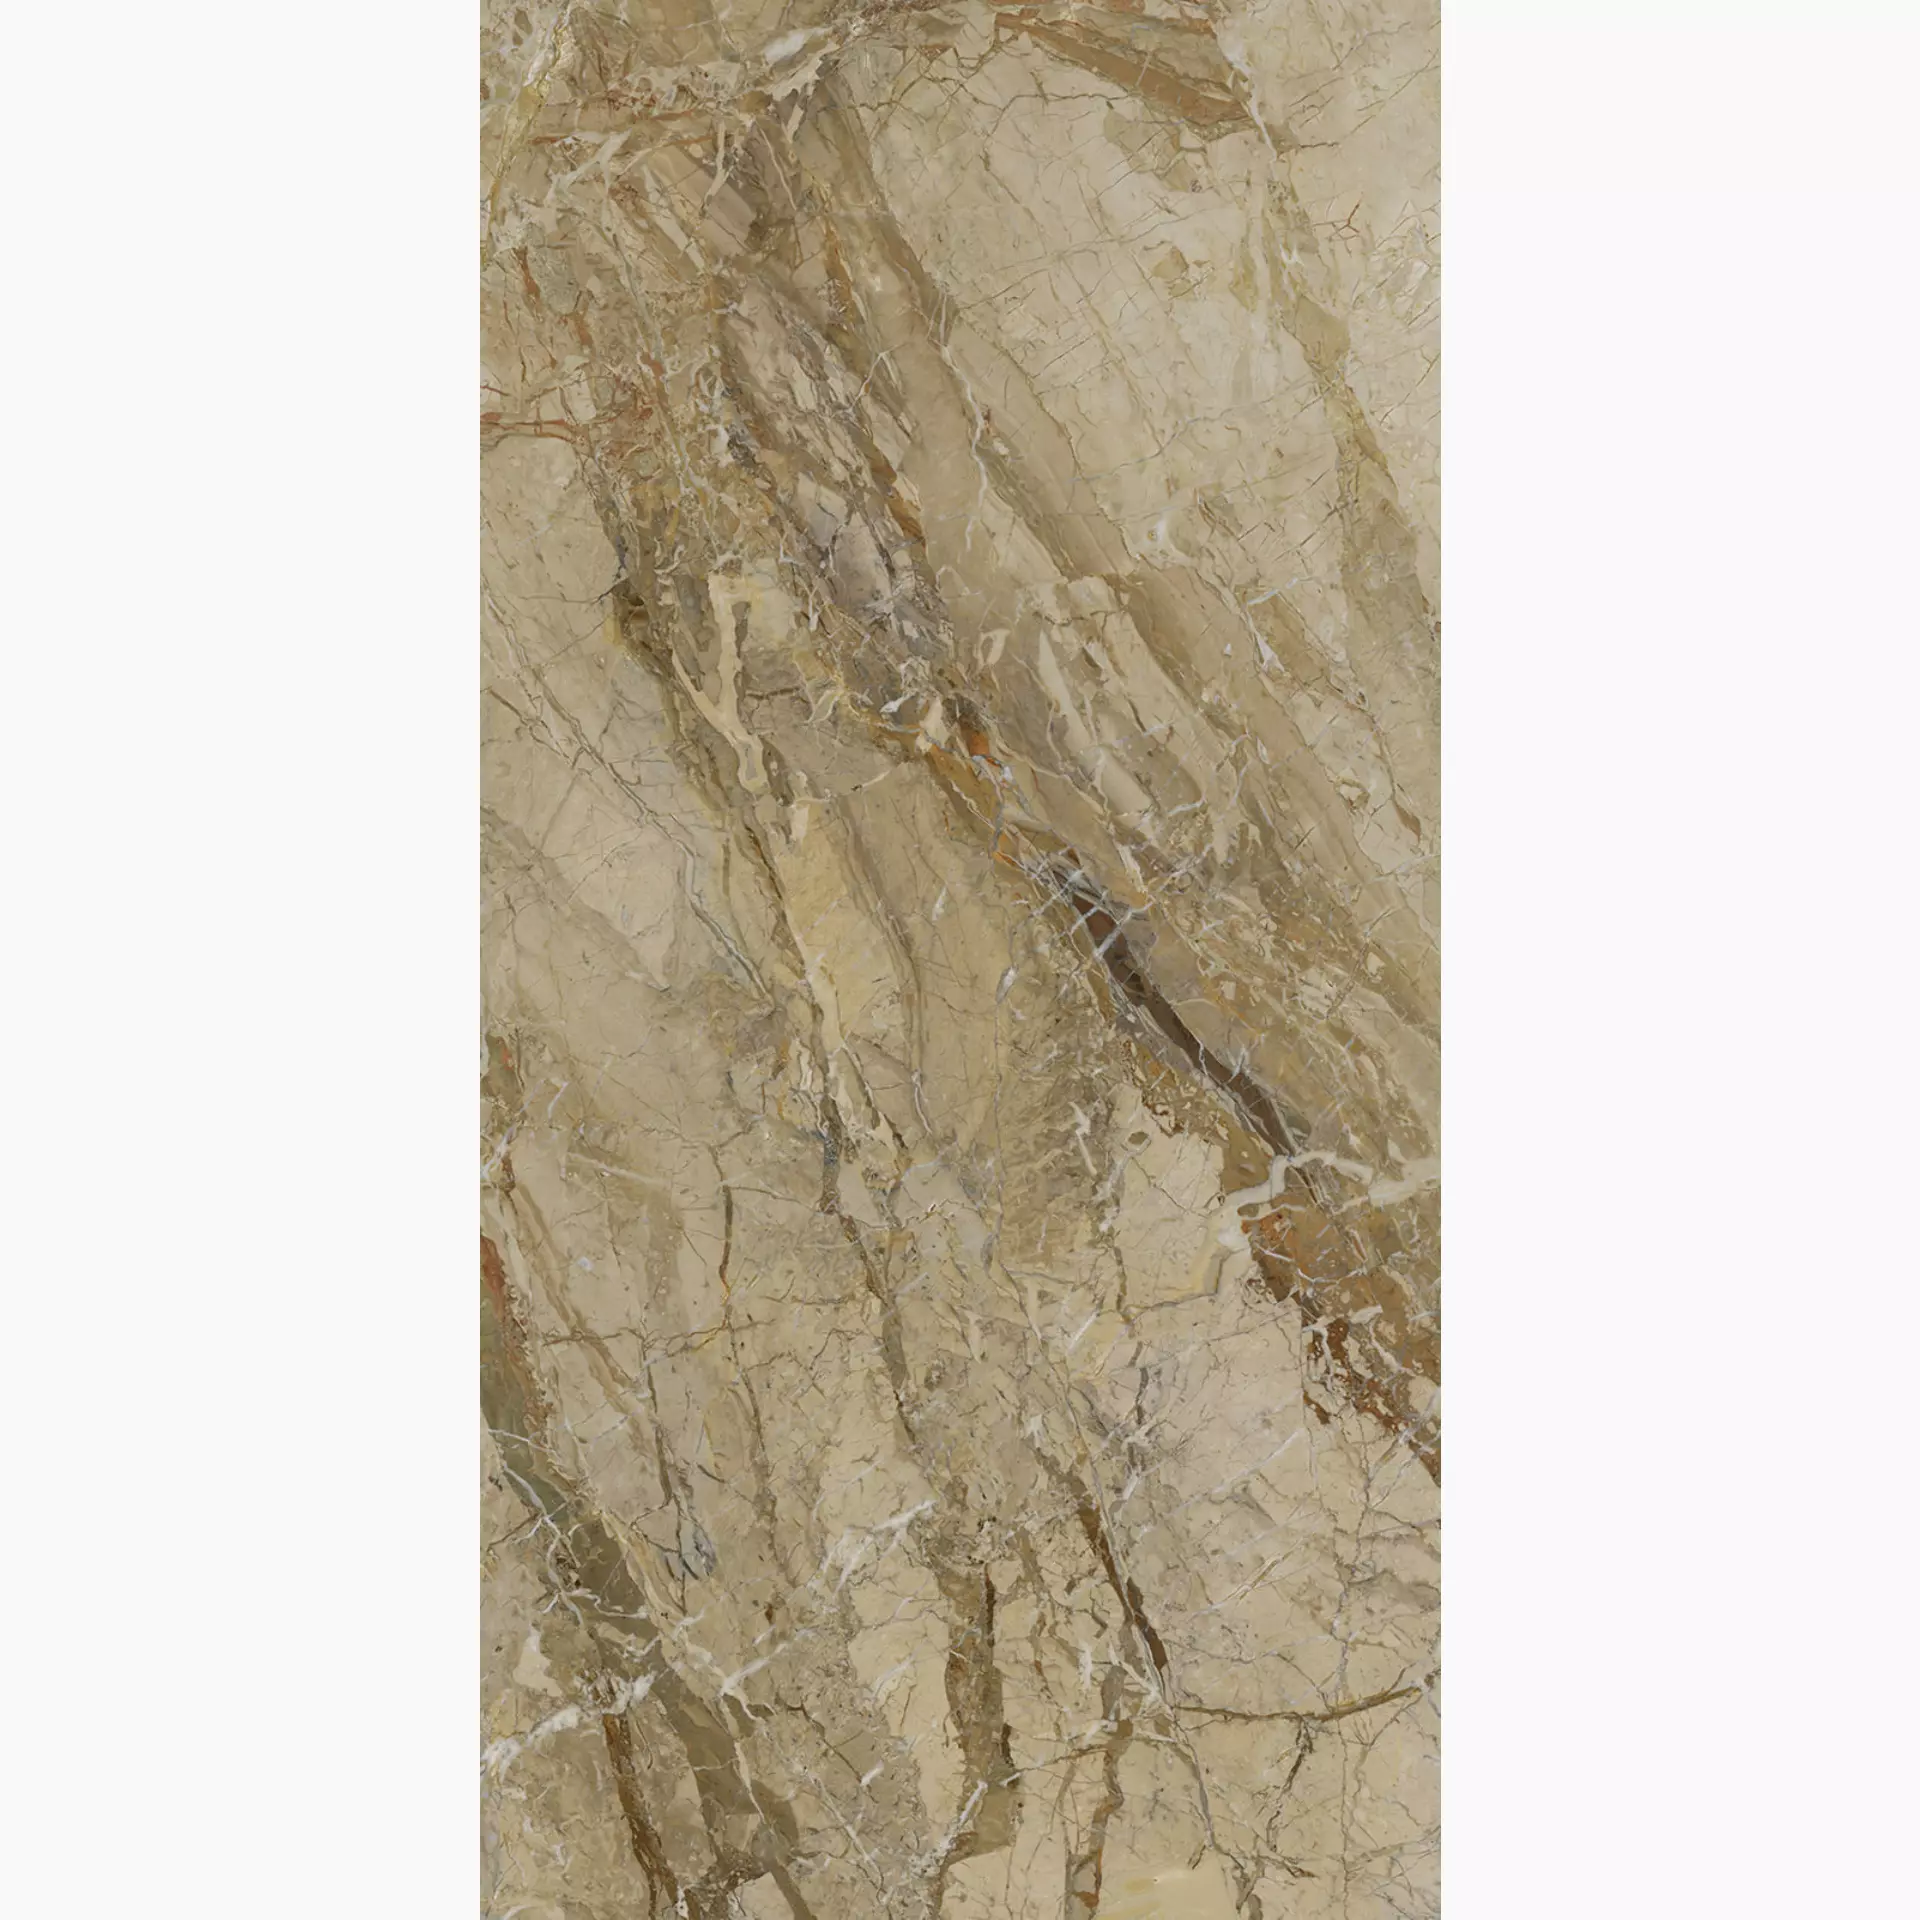 Keope 9Cento Aurora Beige Lappato 46394432 60x120cm rectified 9mm